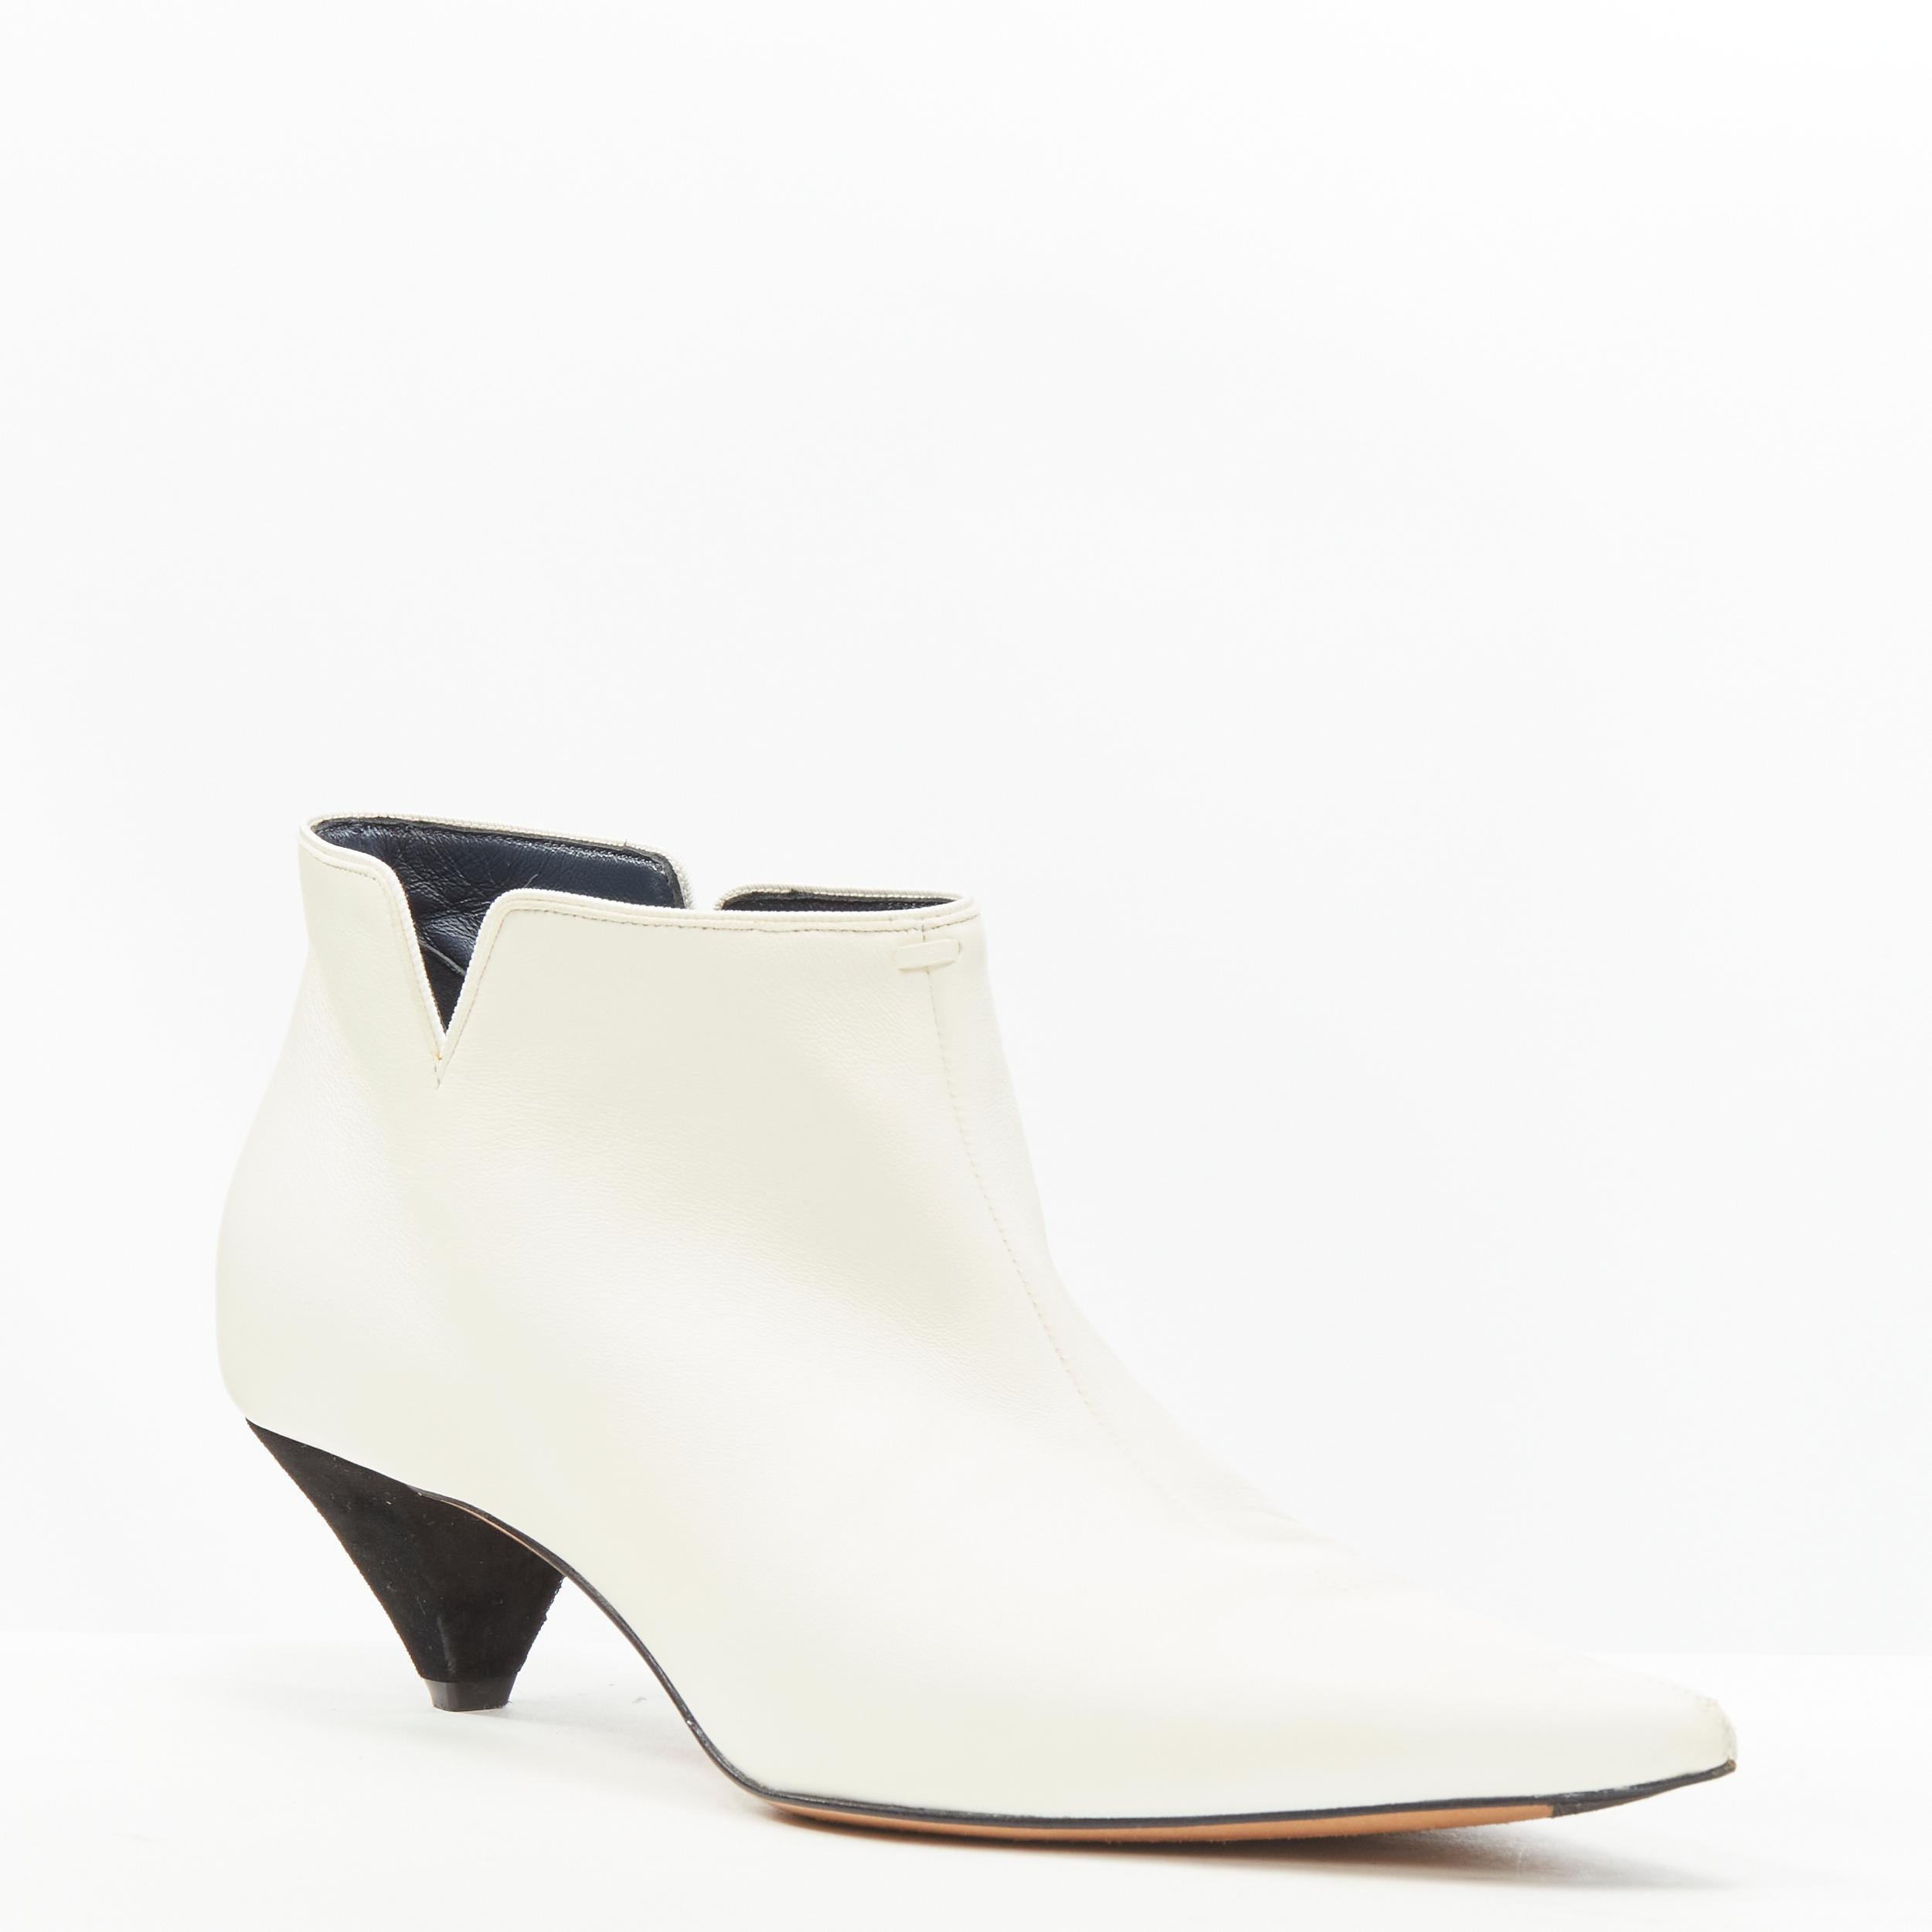 OLD CELINE Phoebe Philo white soft leather suede cone heel ankle bootie EU38 
Reference: LNKO/A01935 
Brand: Celine 
Designer: Phoebe Philo 
Material: Leather 
Color: White 
Pattern: Solid 
Extra Detail: White soft leather upper. Cut out dent along